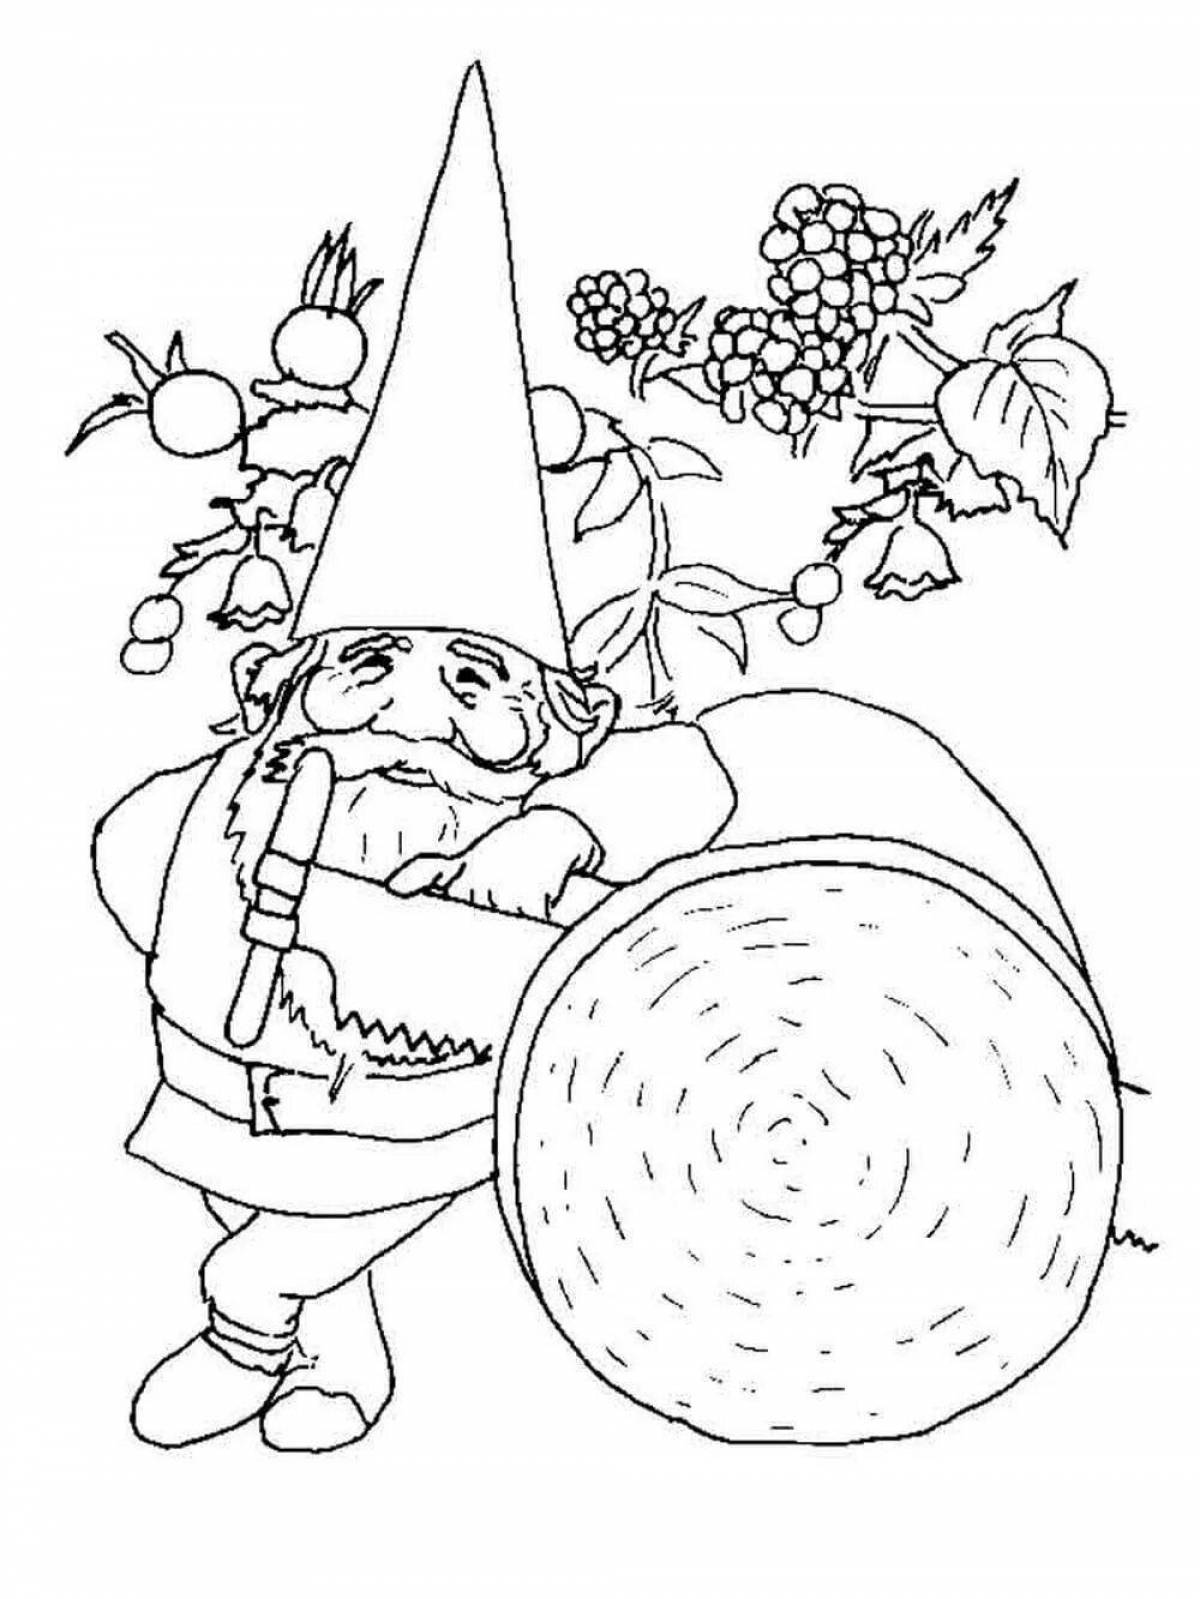 Charming gnome Christmas coloring book